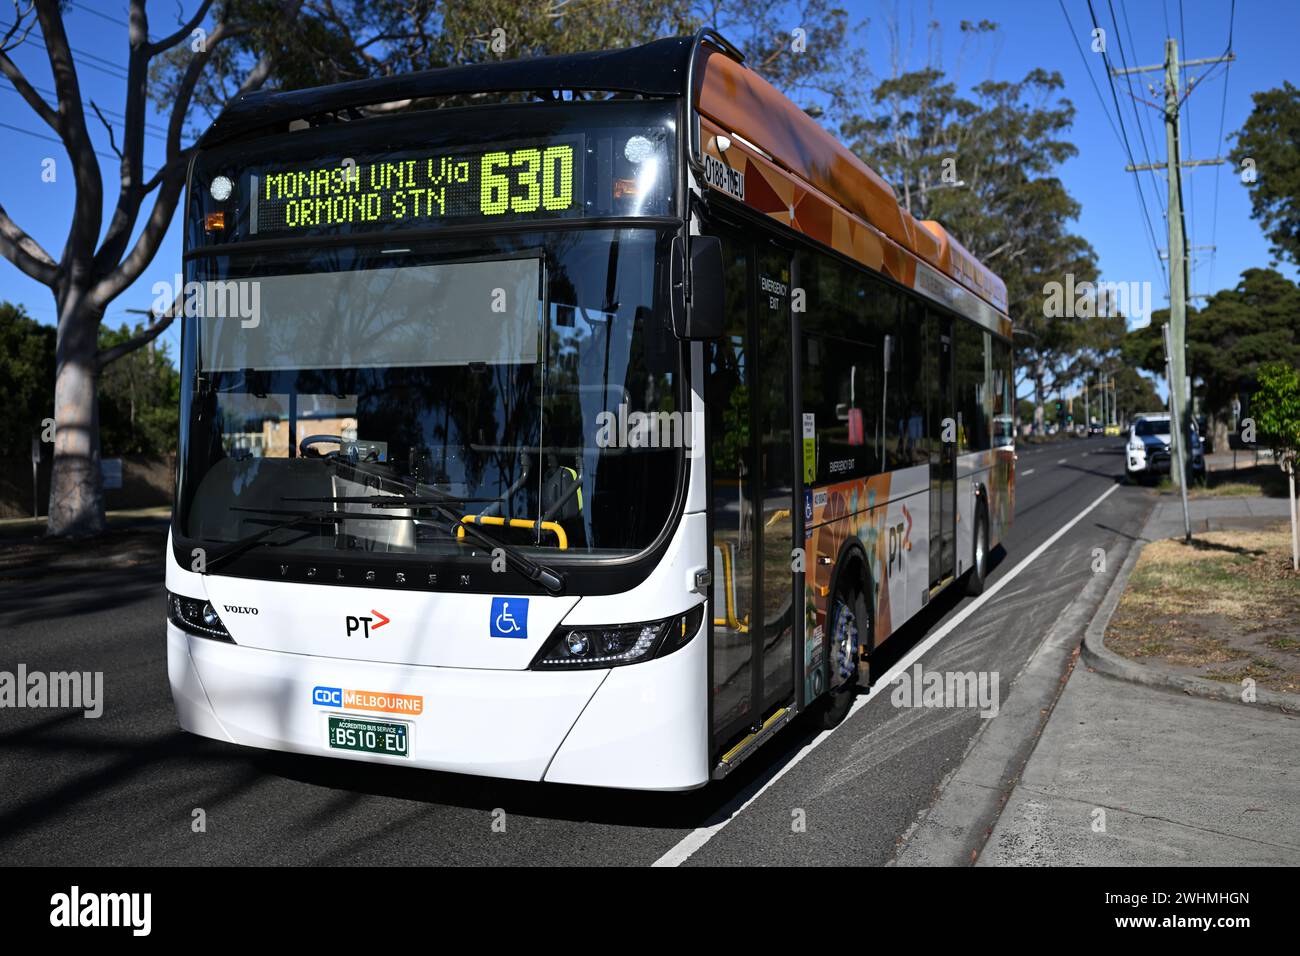 Front view of a Volvo BZL electric bus, operated by CDC Melbourne, as it heads to Monash University during a sunny day Stock Photo